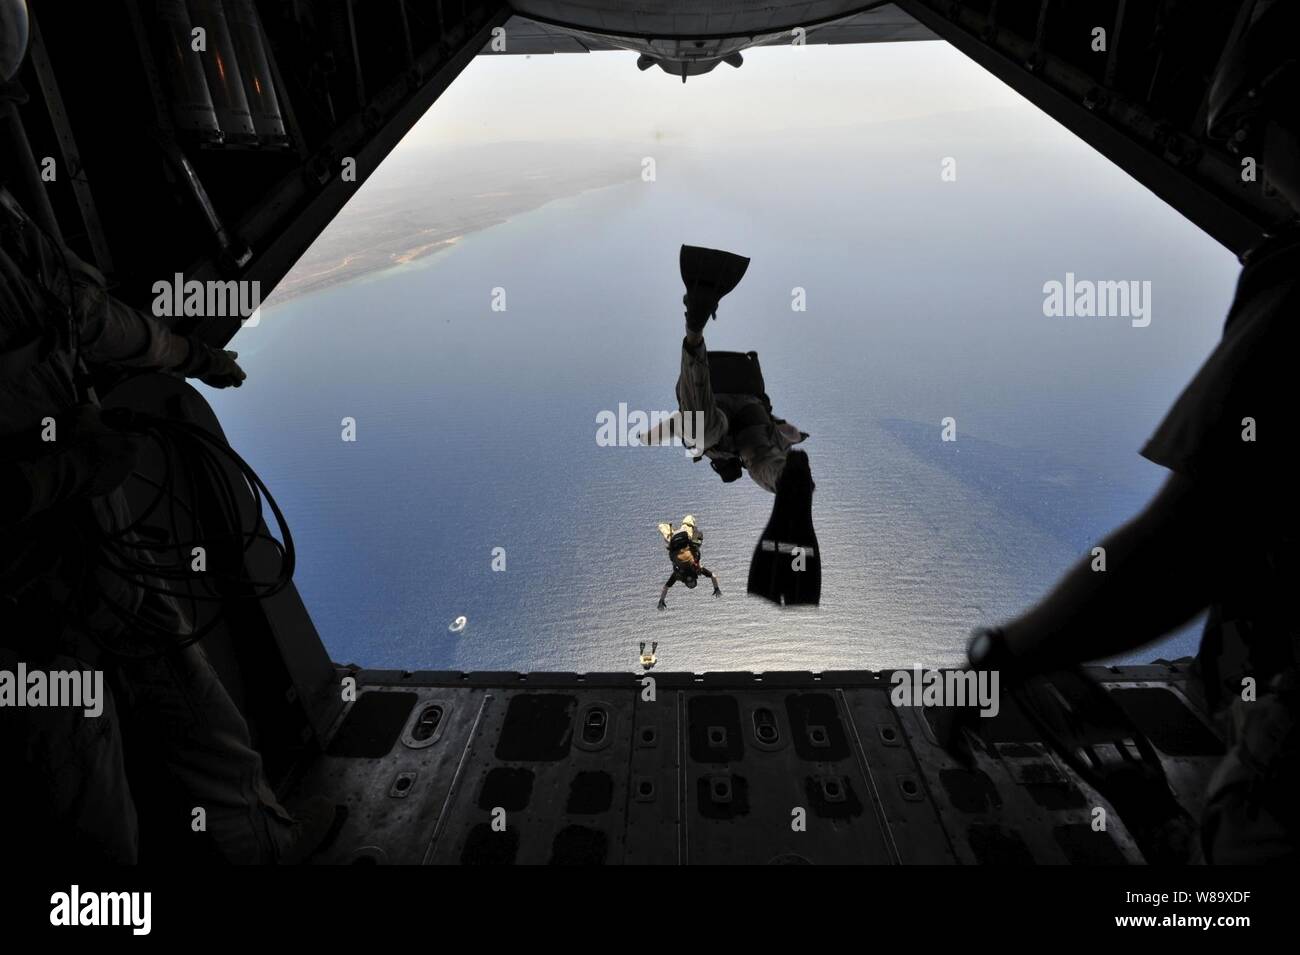 A U.S. Air Force pararescueman from the 82nd Rescue Squadron jumps out of an HC-130P Hercules aircraft during a training exercise in Djibouti on April 23, 2009.  The exercise consisted of transporting pararescuemen to their water jump, aerial refueling of a CH-53E Super Stallion helicopter, an assault landing on an unimproved runway and transfer/loading a simulated survivor from the CH-53E. Stock Photo